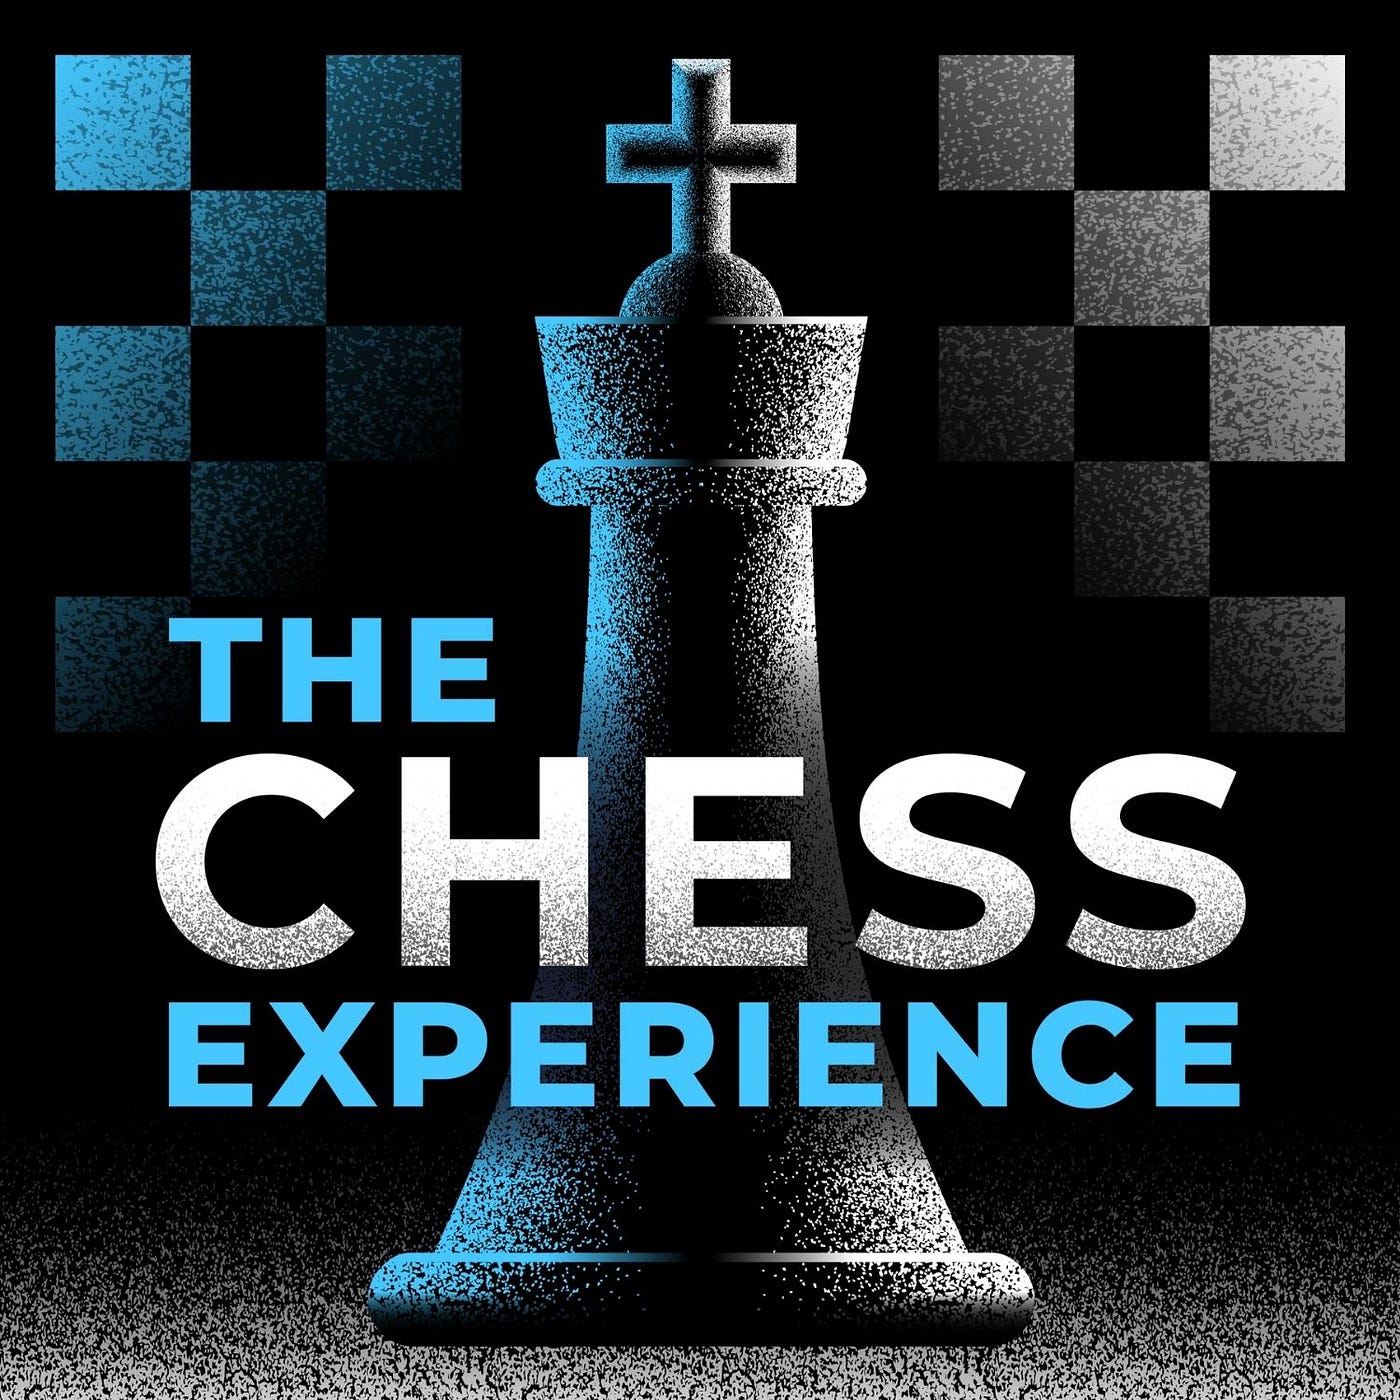 8 Chess Openings You Must Learn if You Care About Improving, by Quinn  Bunting, Getting Into Chess